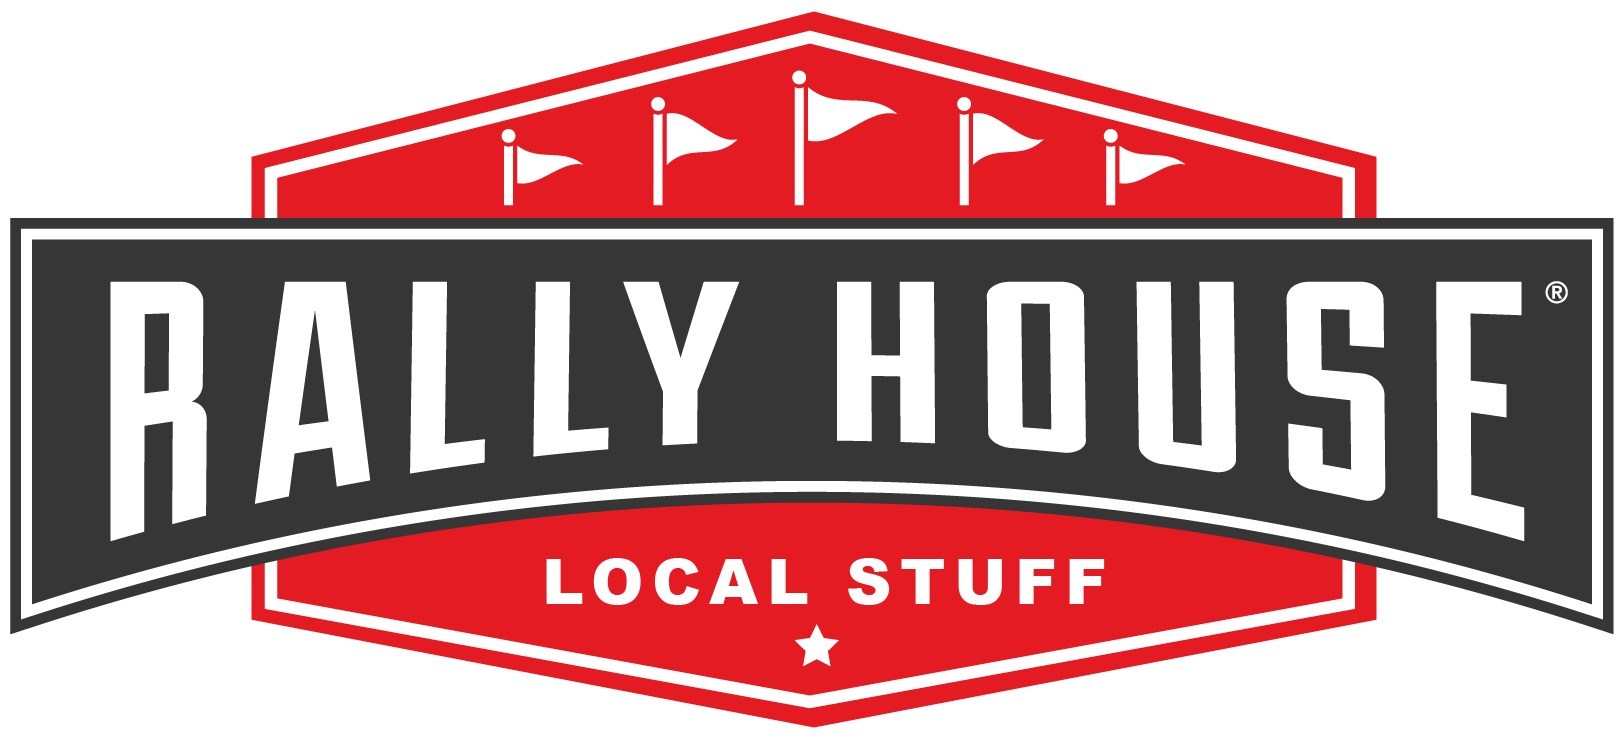 Rally House is a specialty sports boutique that offers a large selection of apparel, gifts and home décor representing local NCAA, NFL, MLB, NBA, NHL and MLS teams. We also carry local novelties and regional-inspired apparel, gifts and food. With locations in the Midwest, South and Northeast, we bring stylish sports apparel and unique team gifts to cities where fans live, work and cheer. (PRNewsfoto/Rally House)